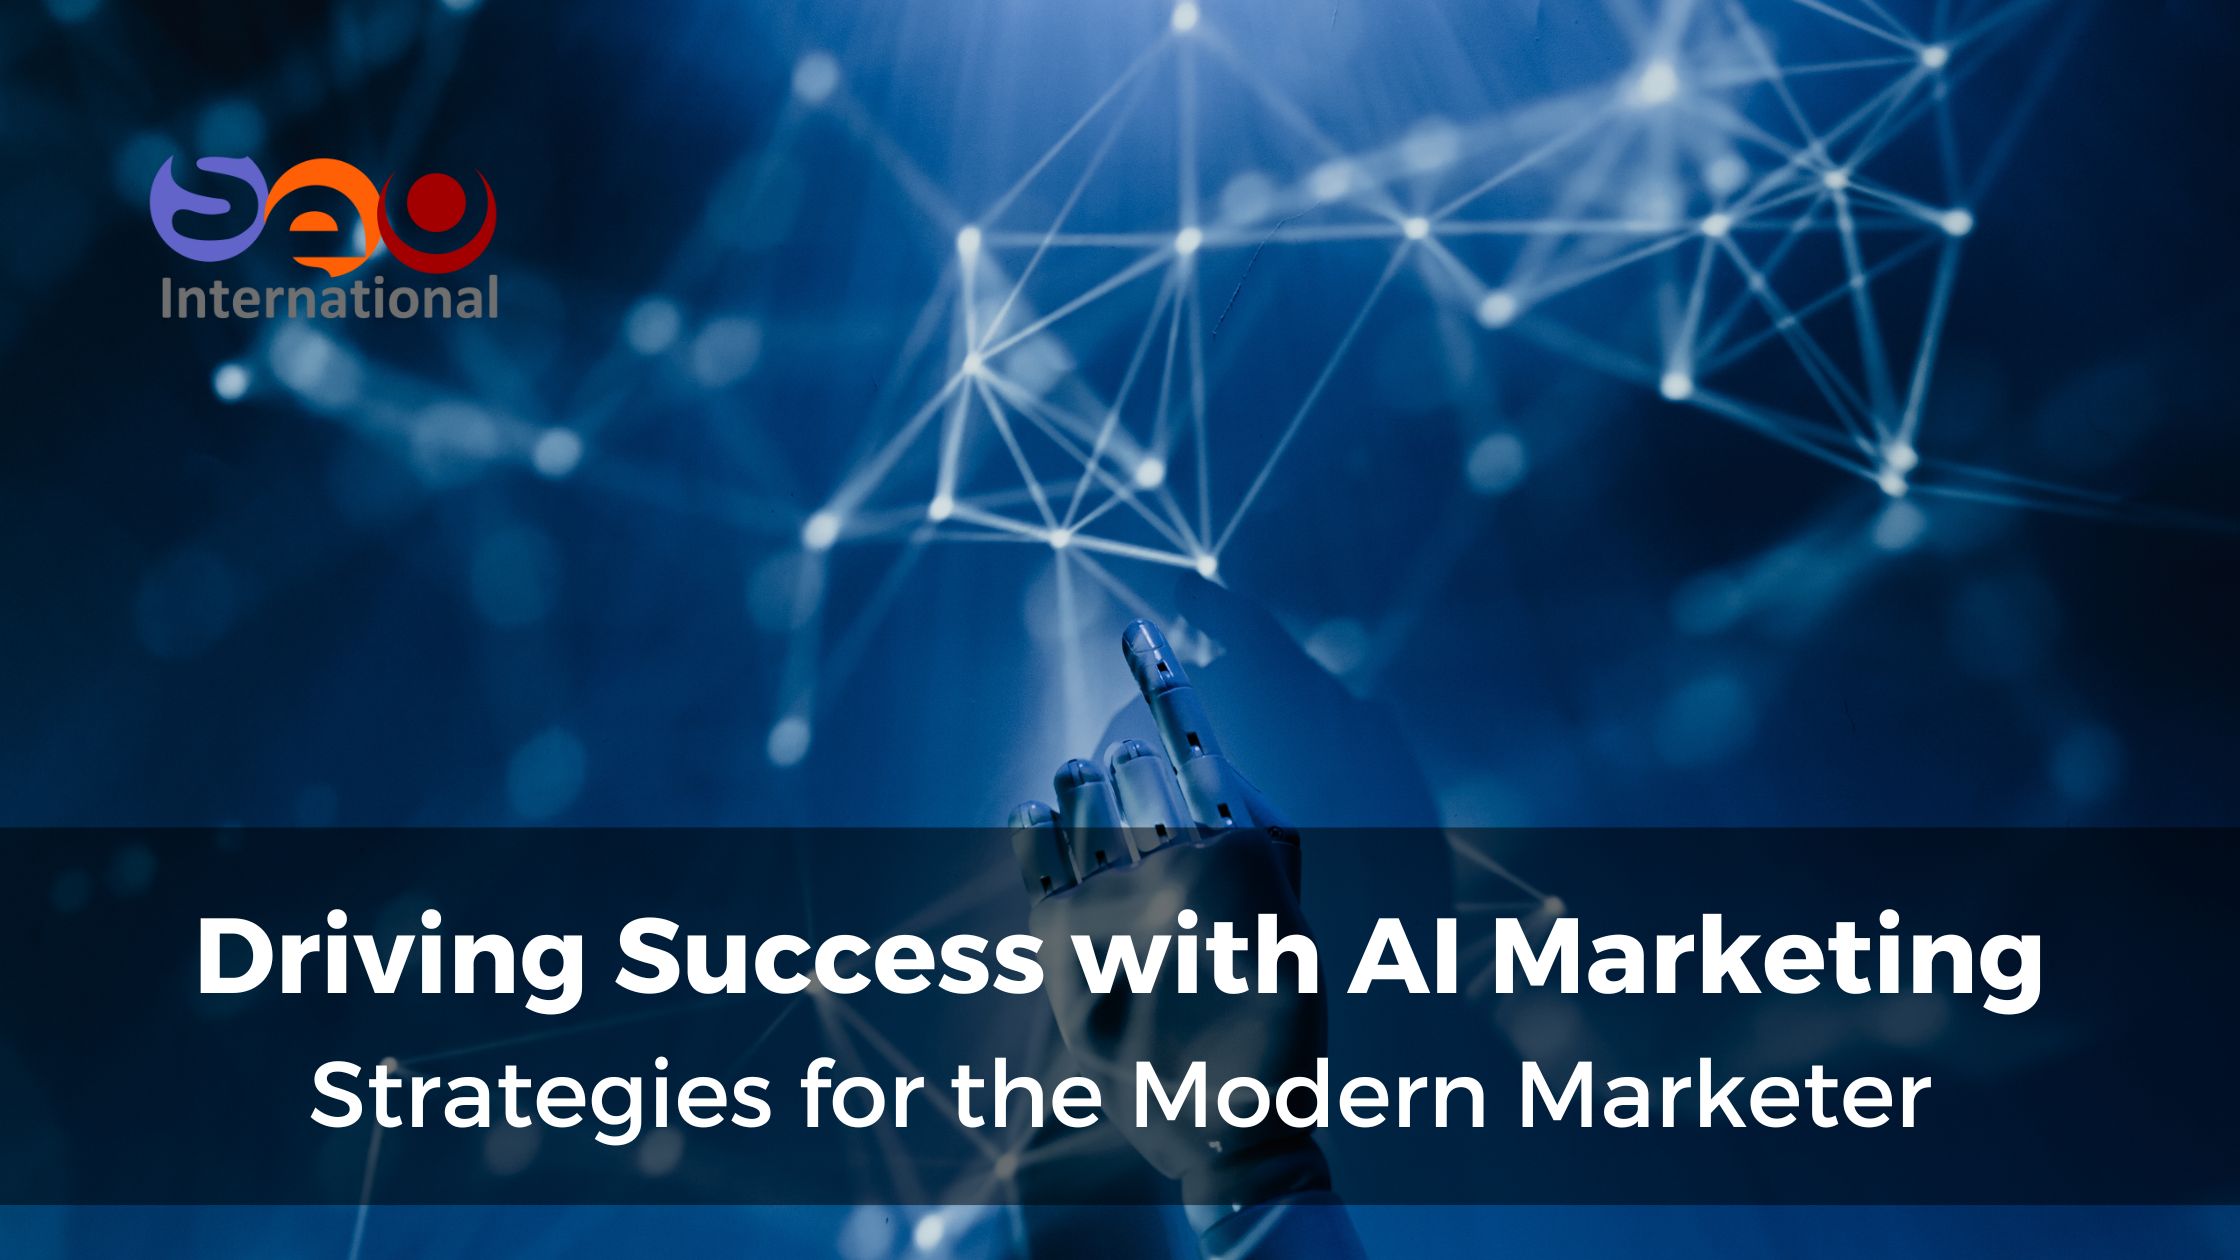 Driving Success with AI Marketing: Strategies for the Modern Marketer